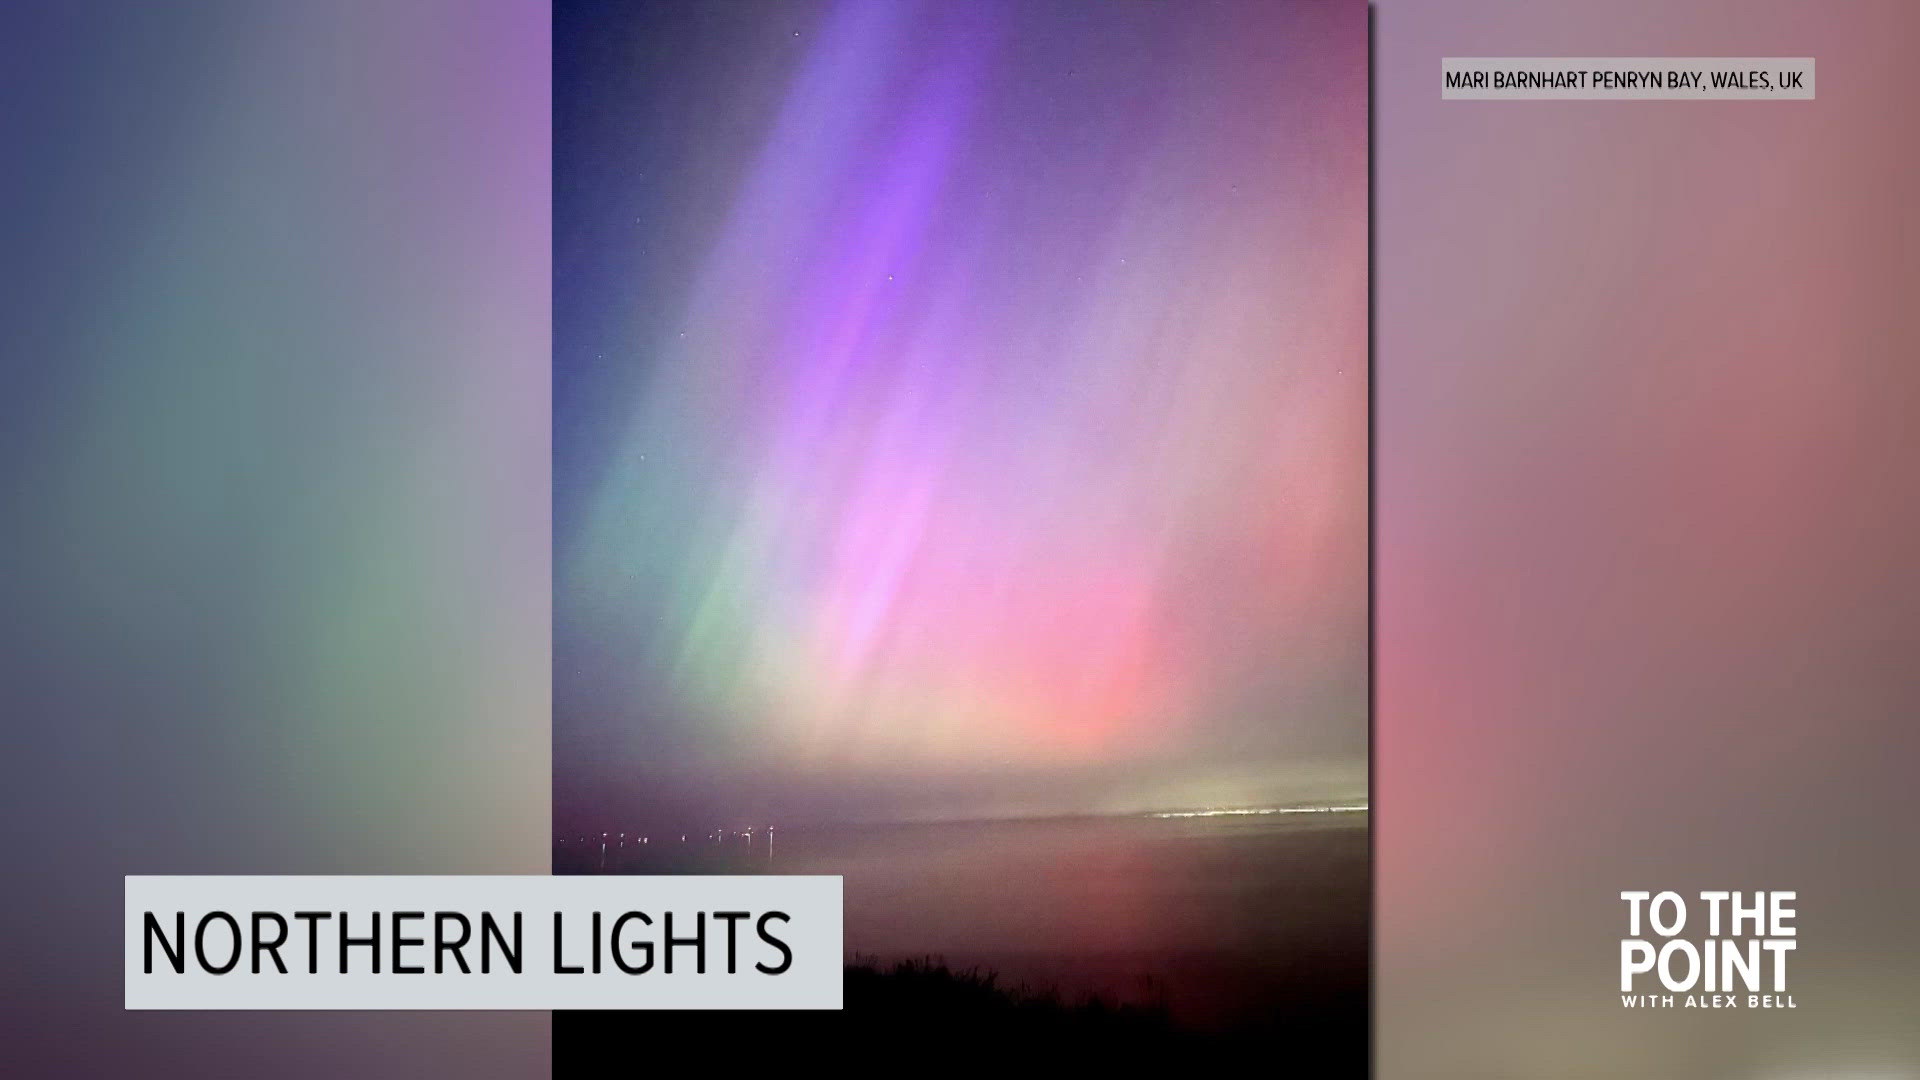 Check out these photos from the UK of the Northern Lights as people start to see them around the world.